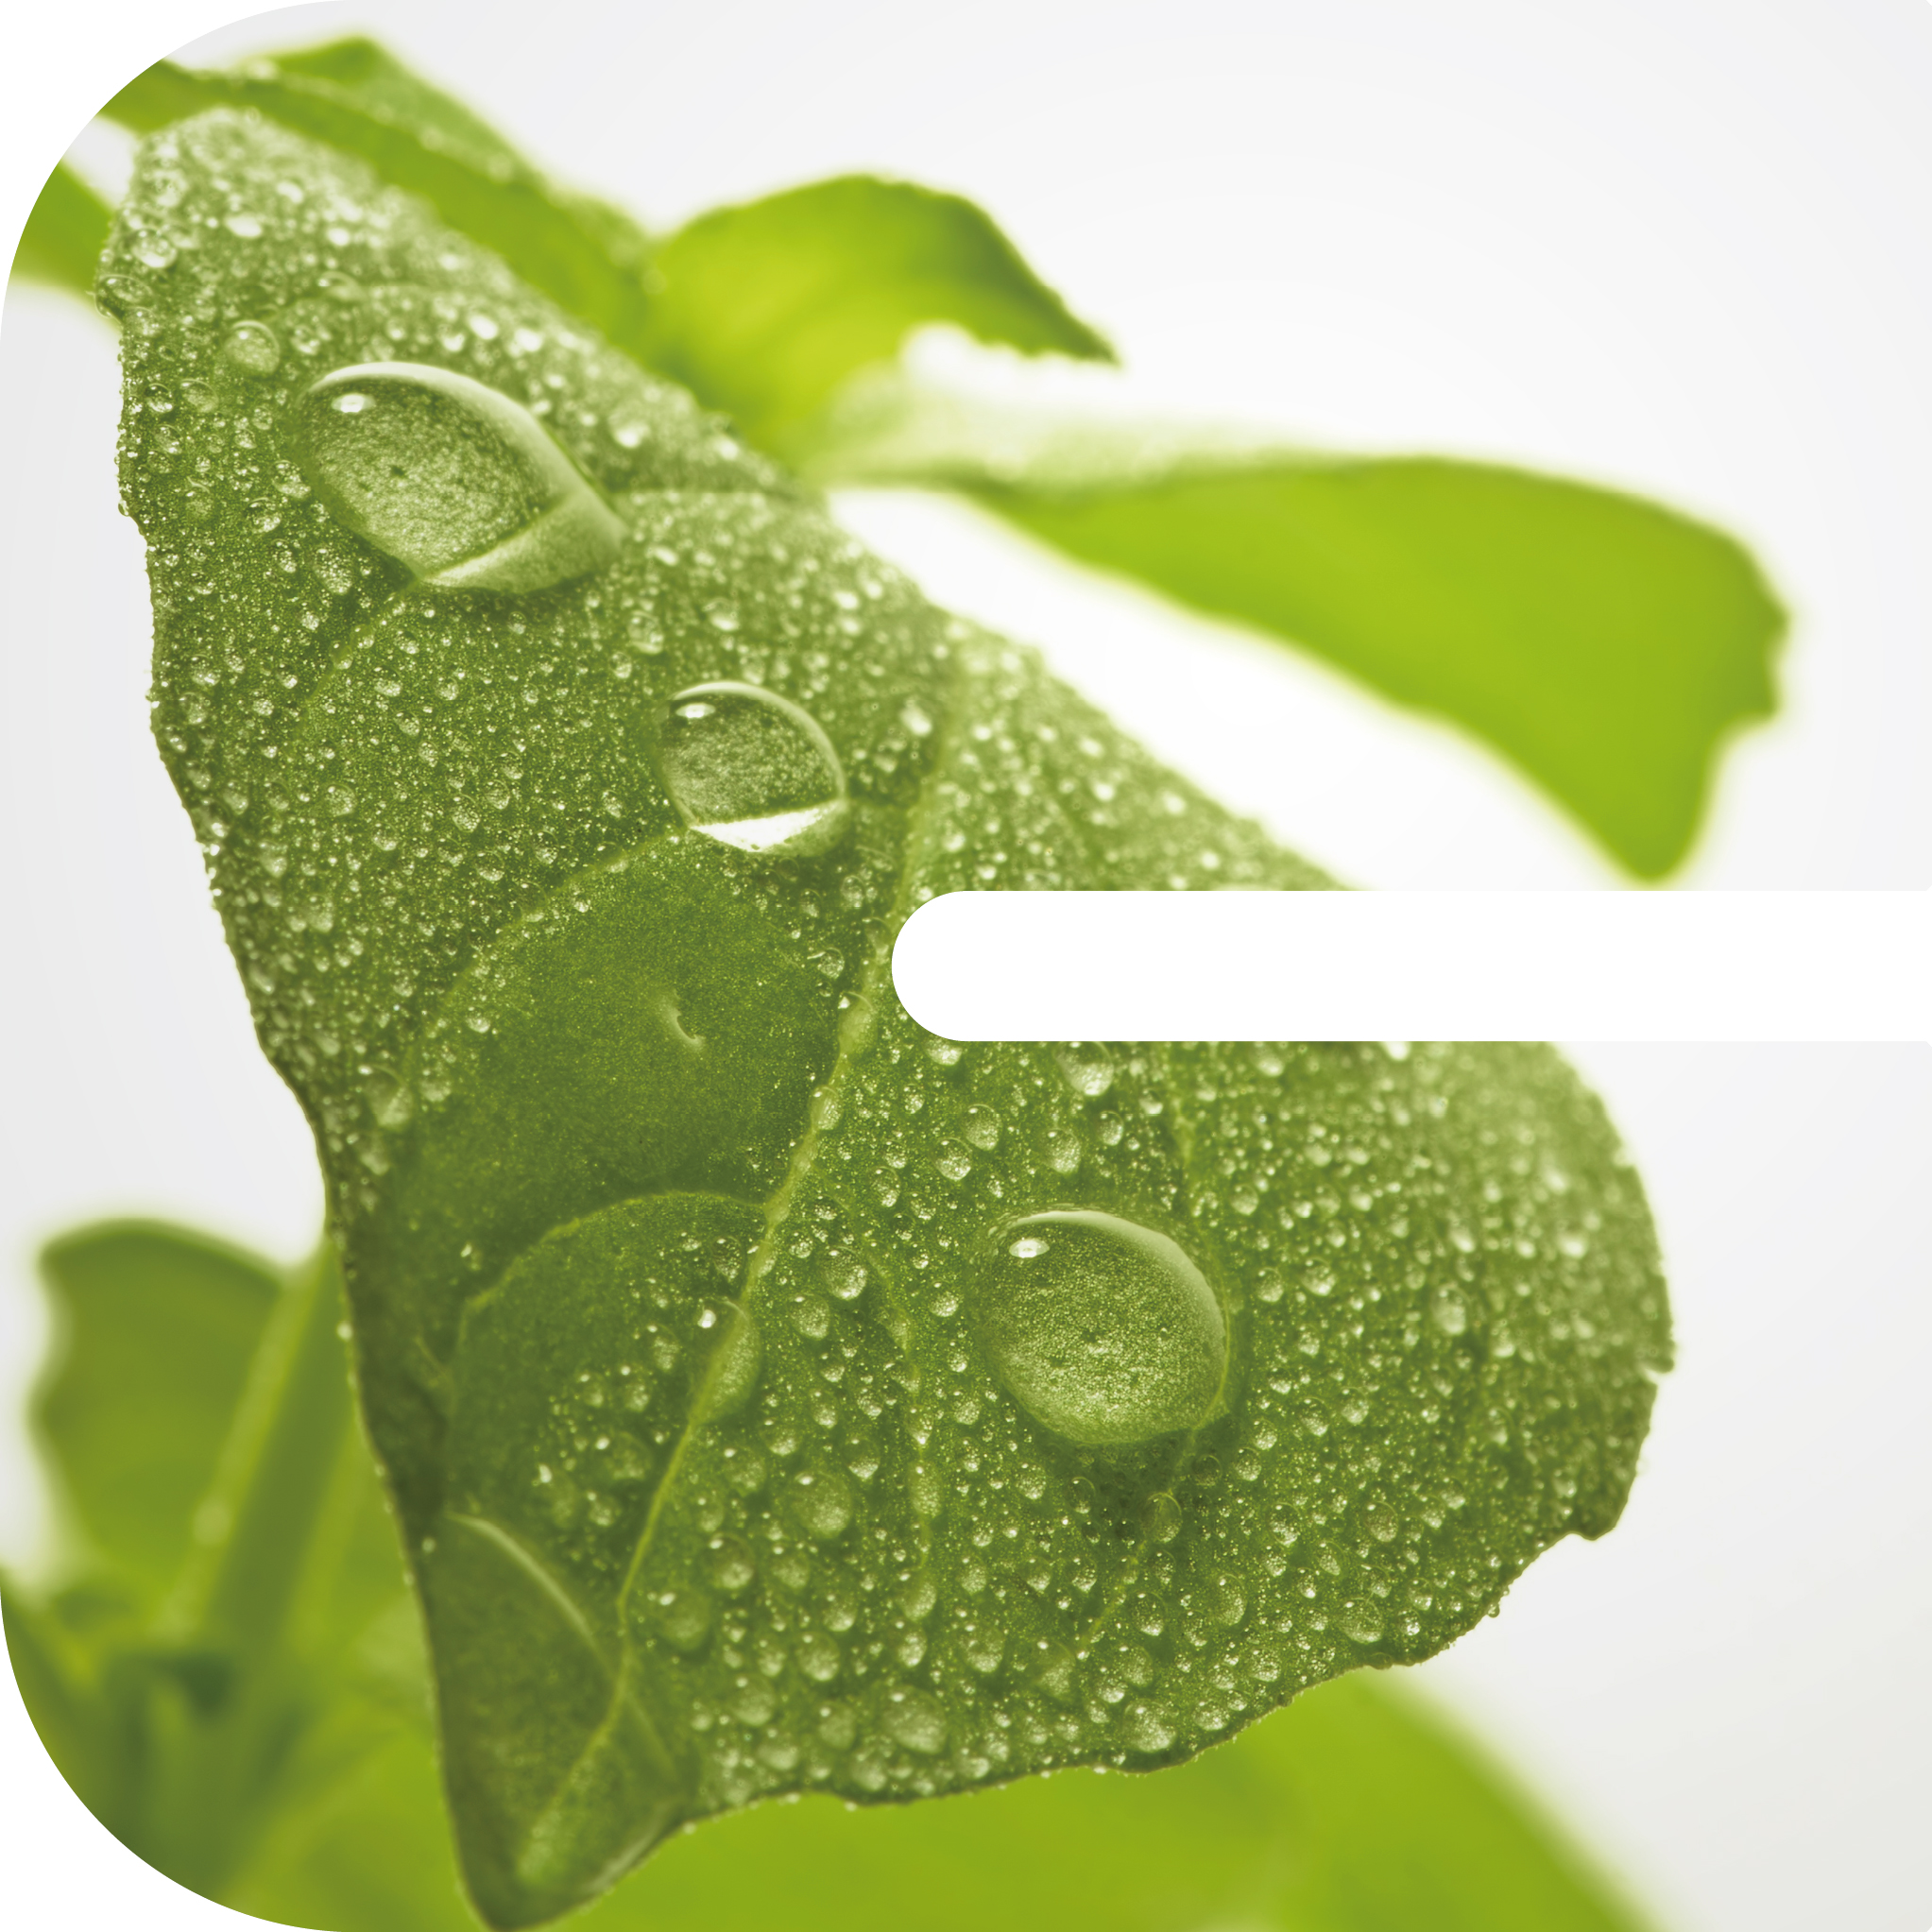 Clariant showcases "green" crop solutions at CAC 2018 exhibition in China. 
(Photo: Clariant)